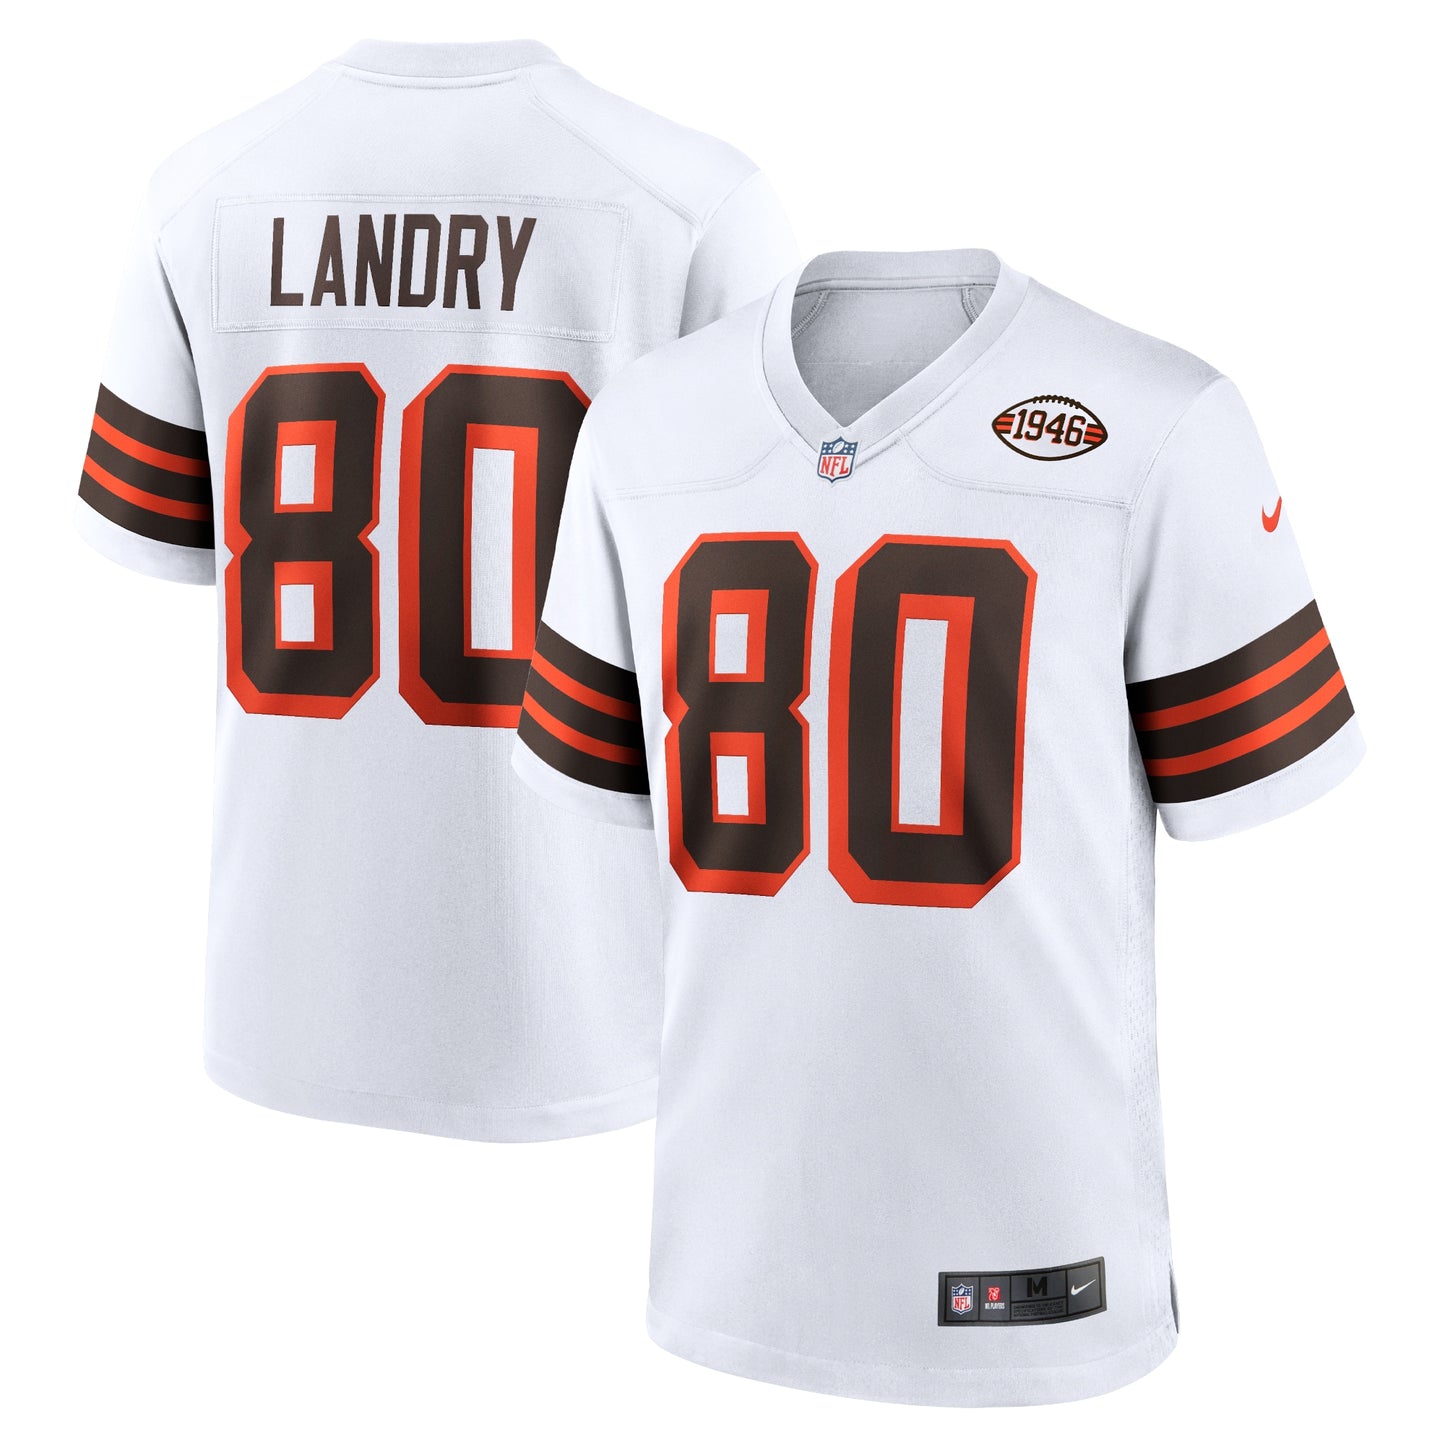 Jarvis Landry Cleveland Browns Nike 1946 Collection Alternate Game Jersey - White